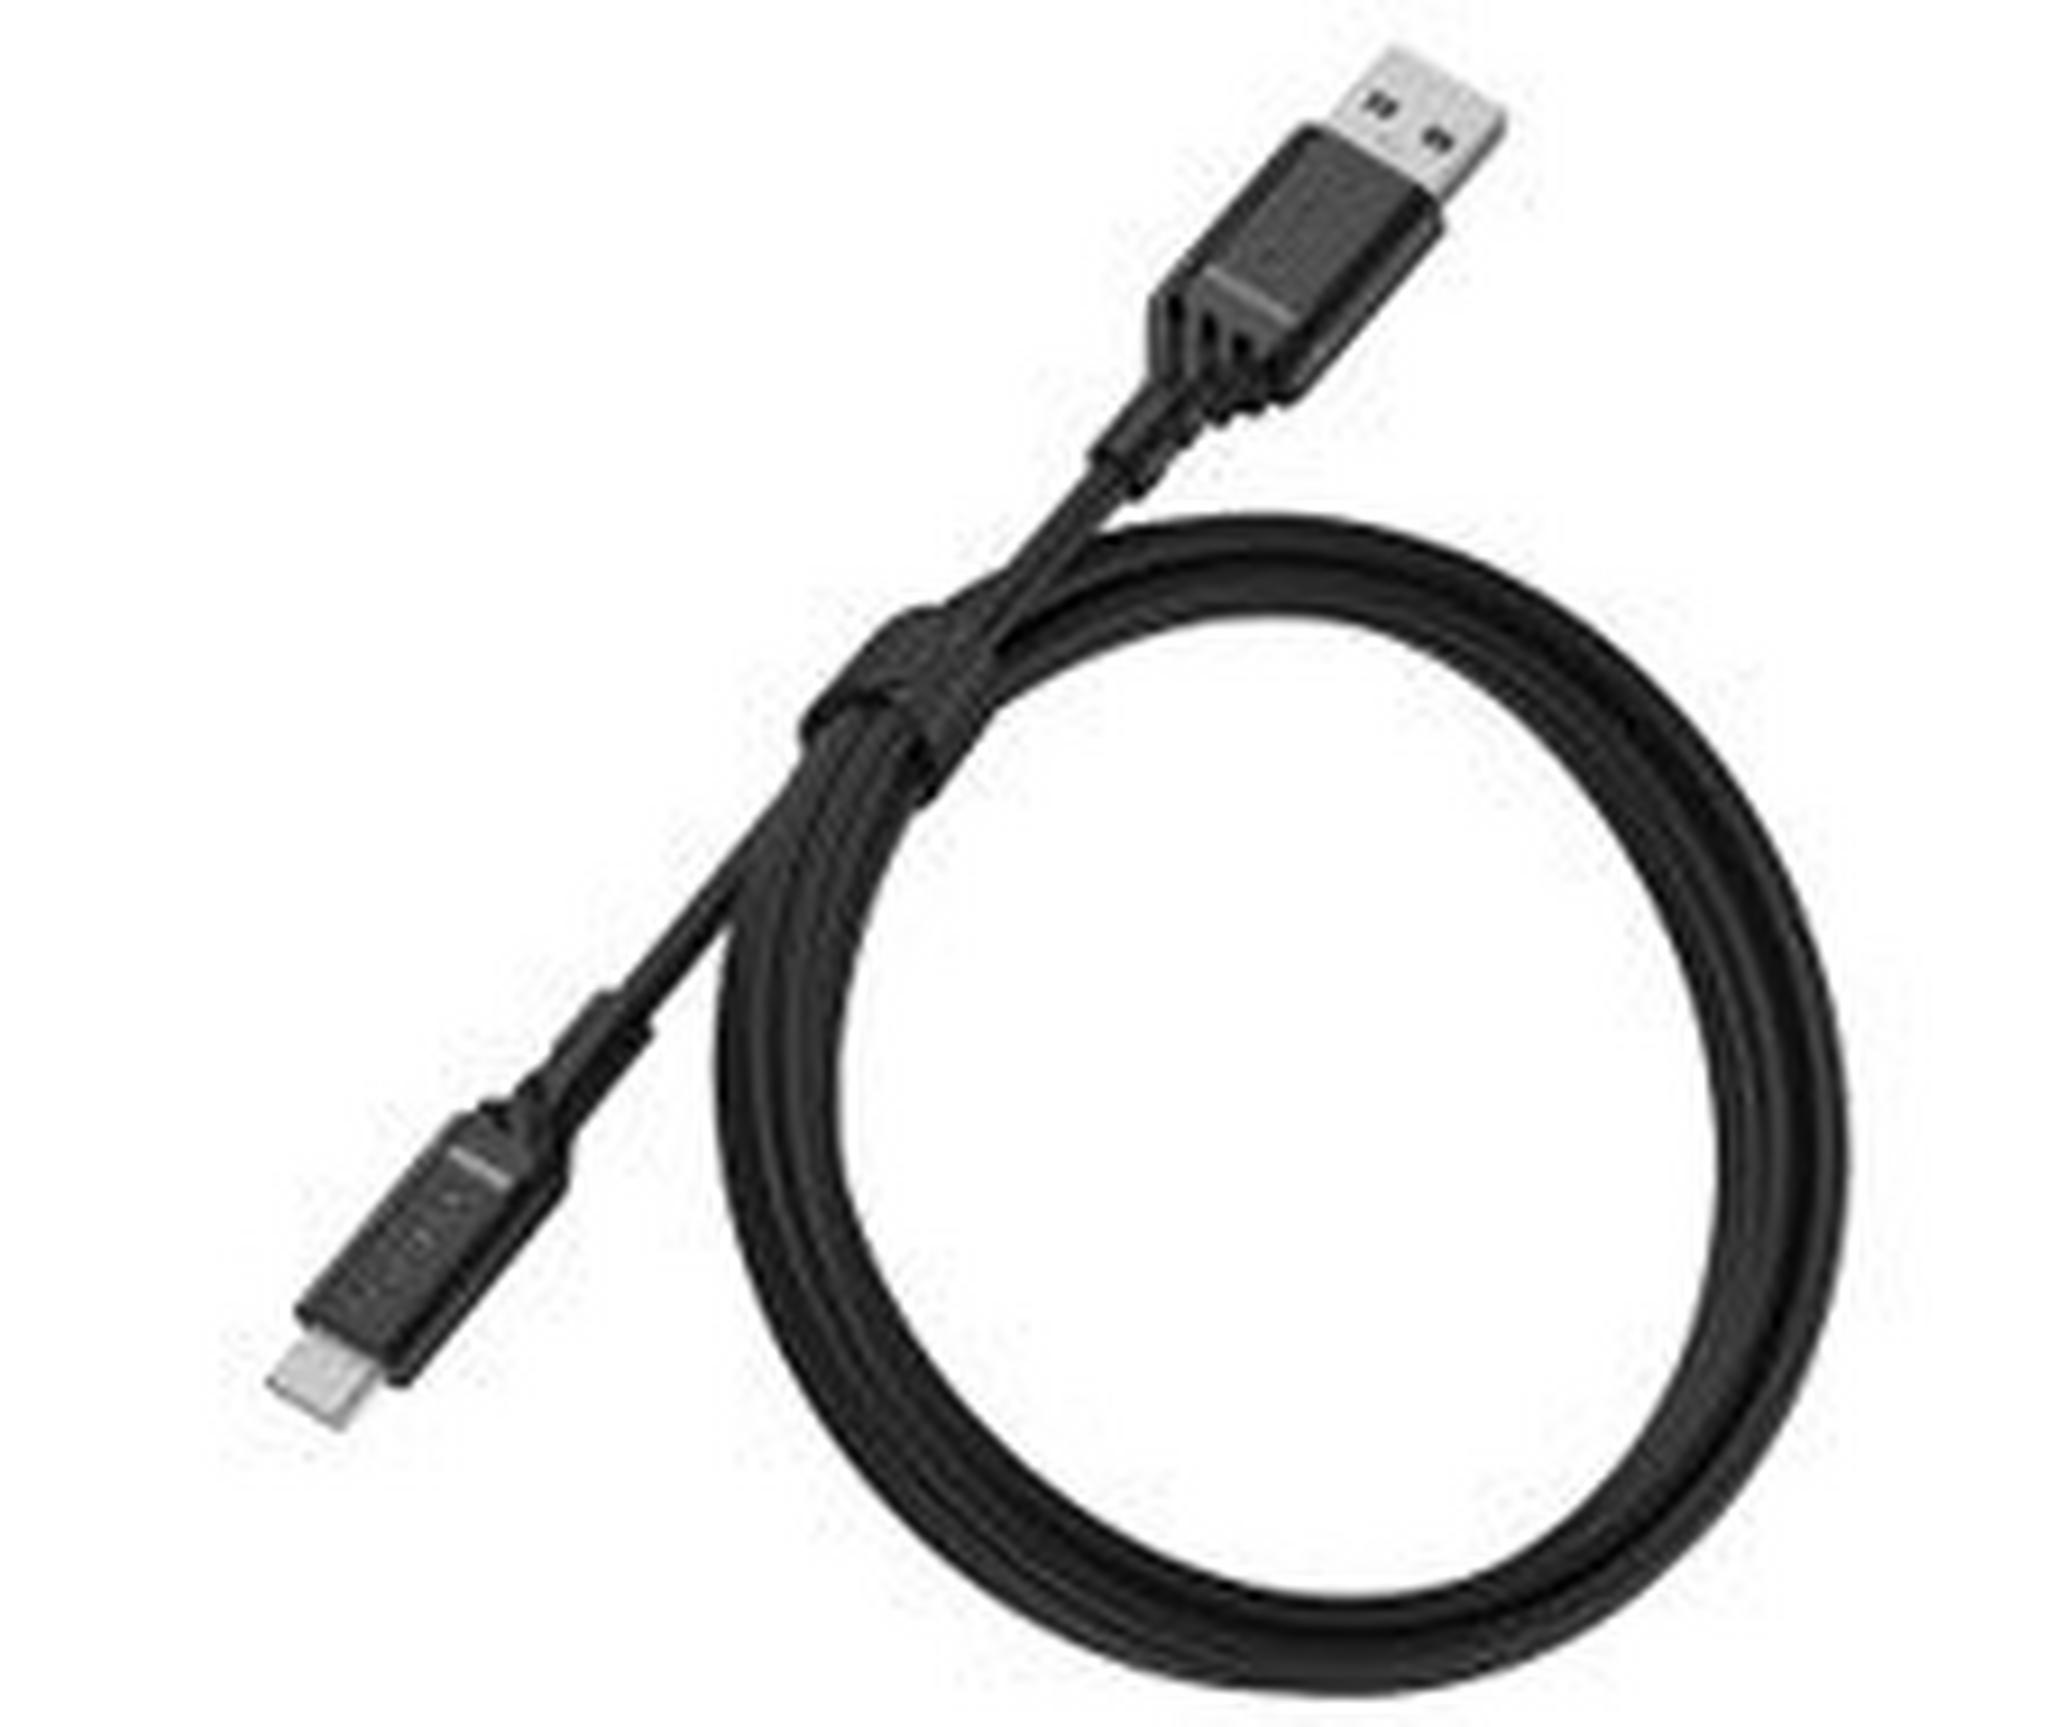 OtterBox USB-A to USB-C Cable 1-Meter (78-52537) - Black